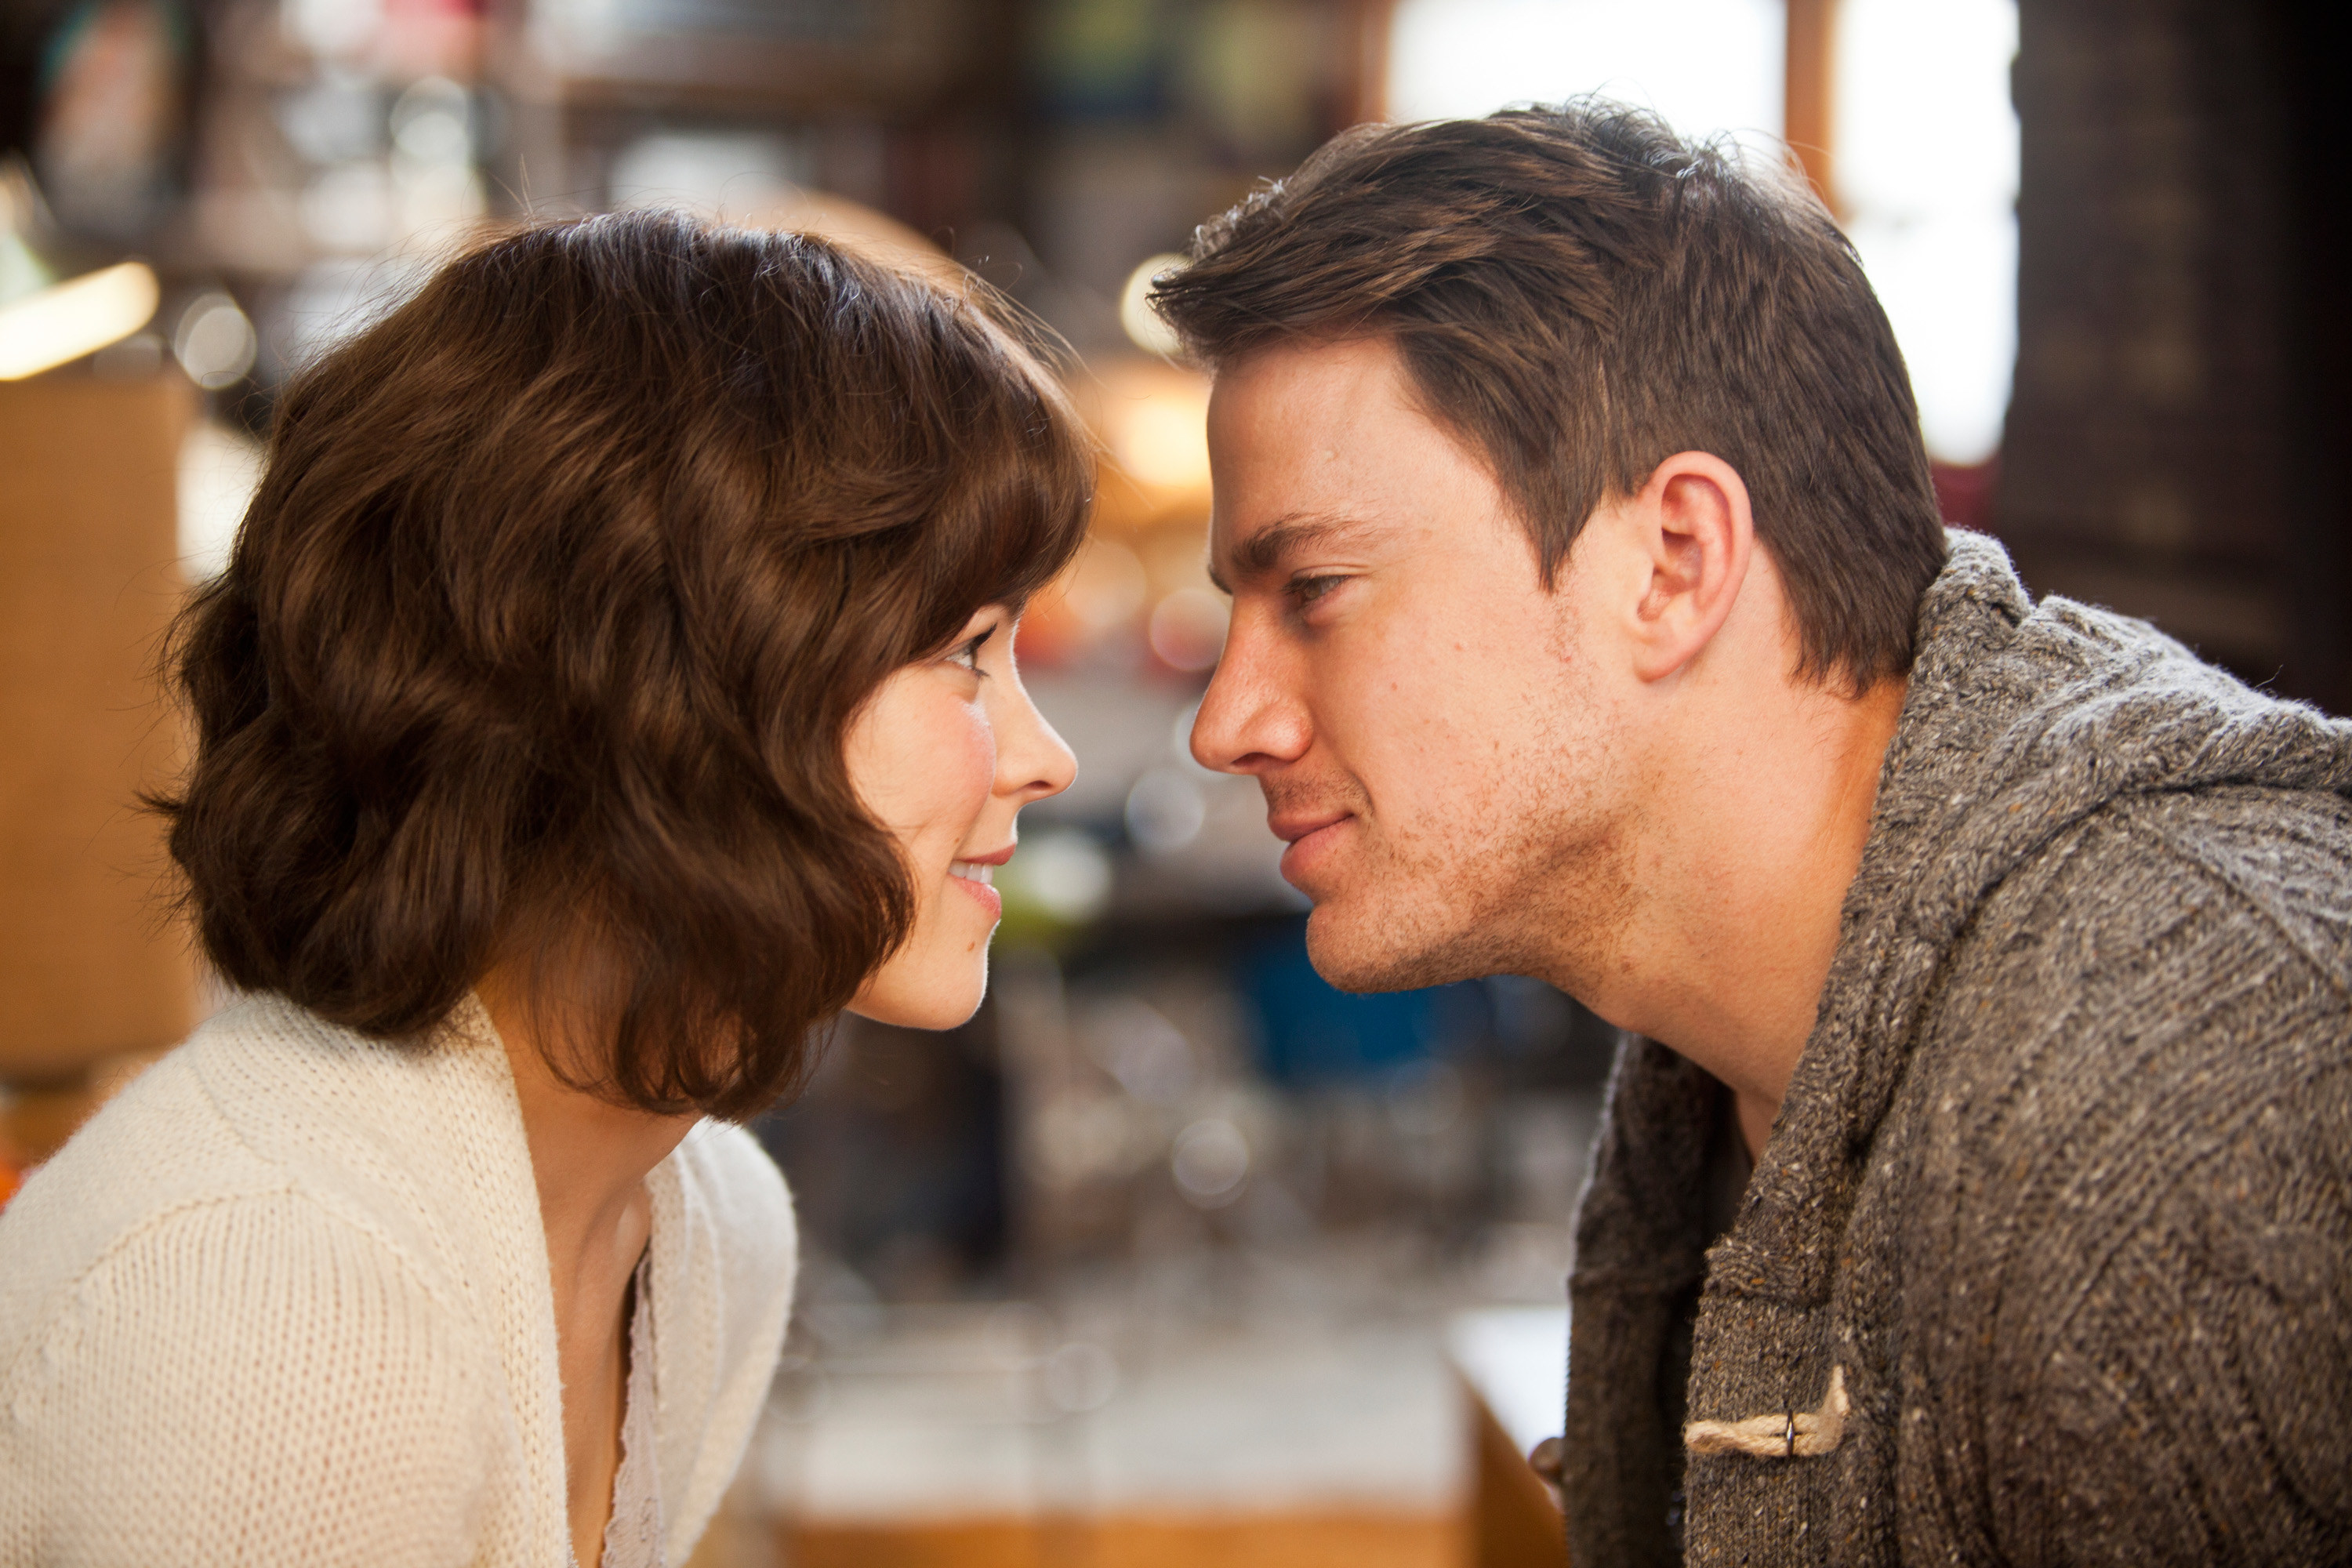 Rachel McAdams and Channing Tatum looking lovingly at each other